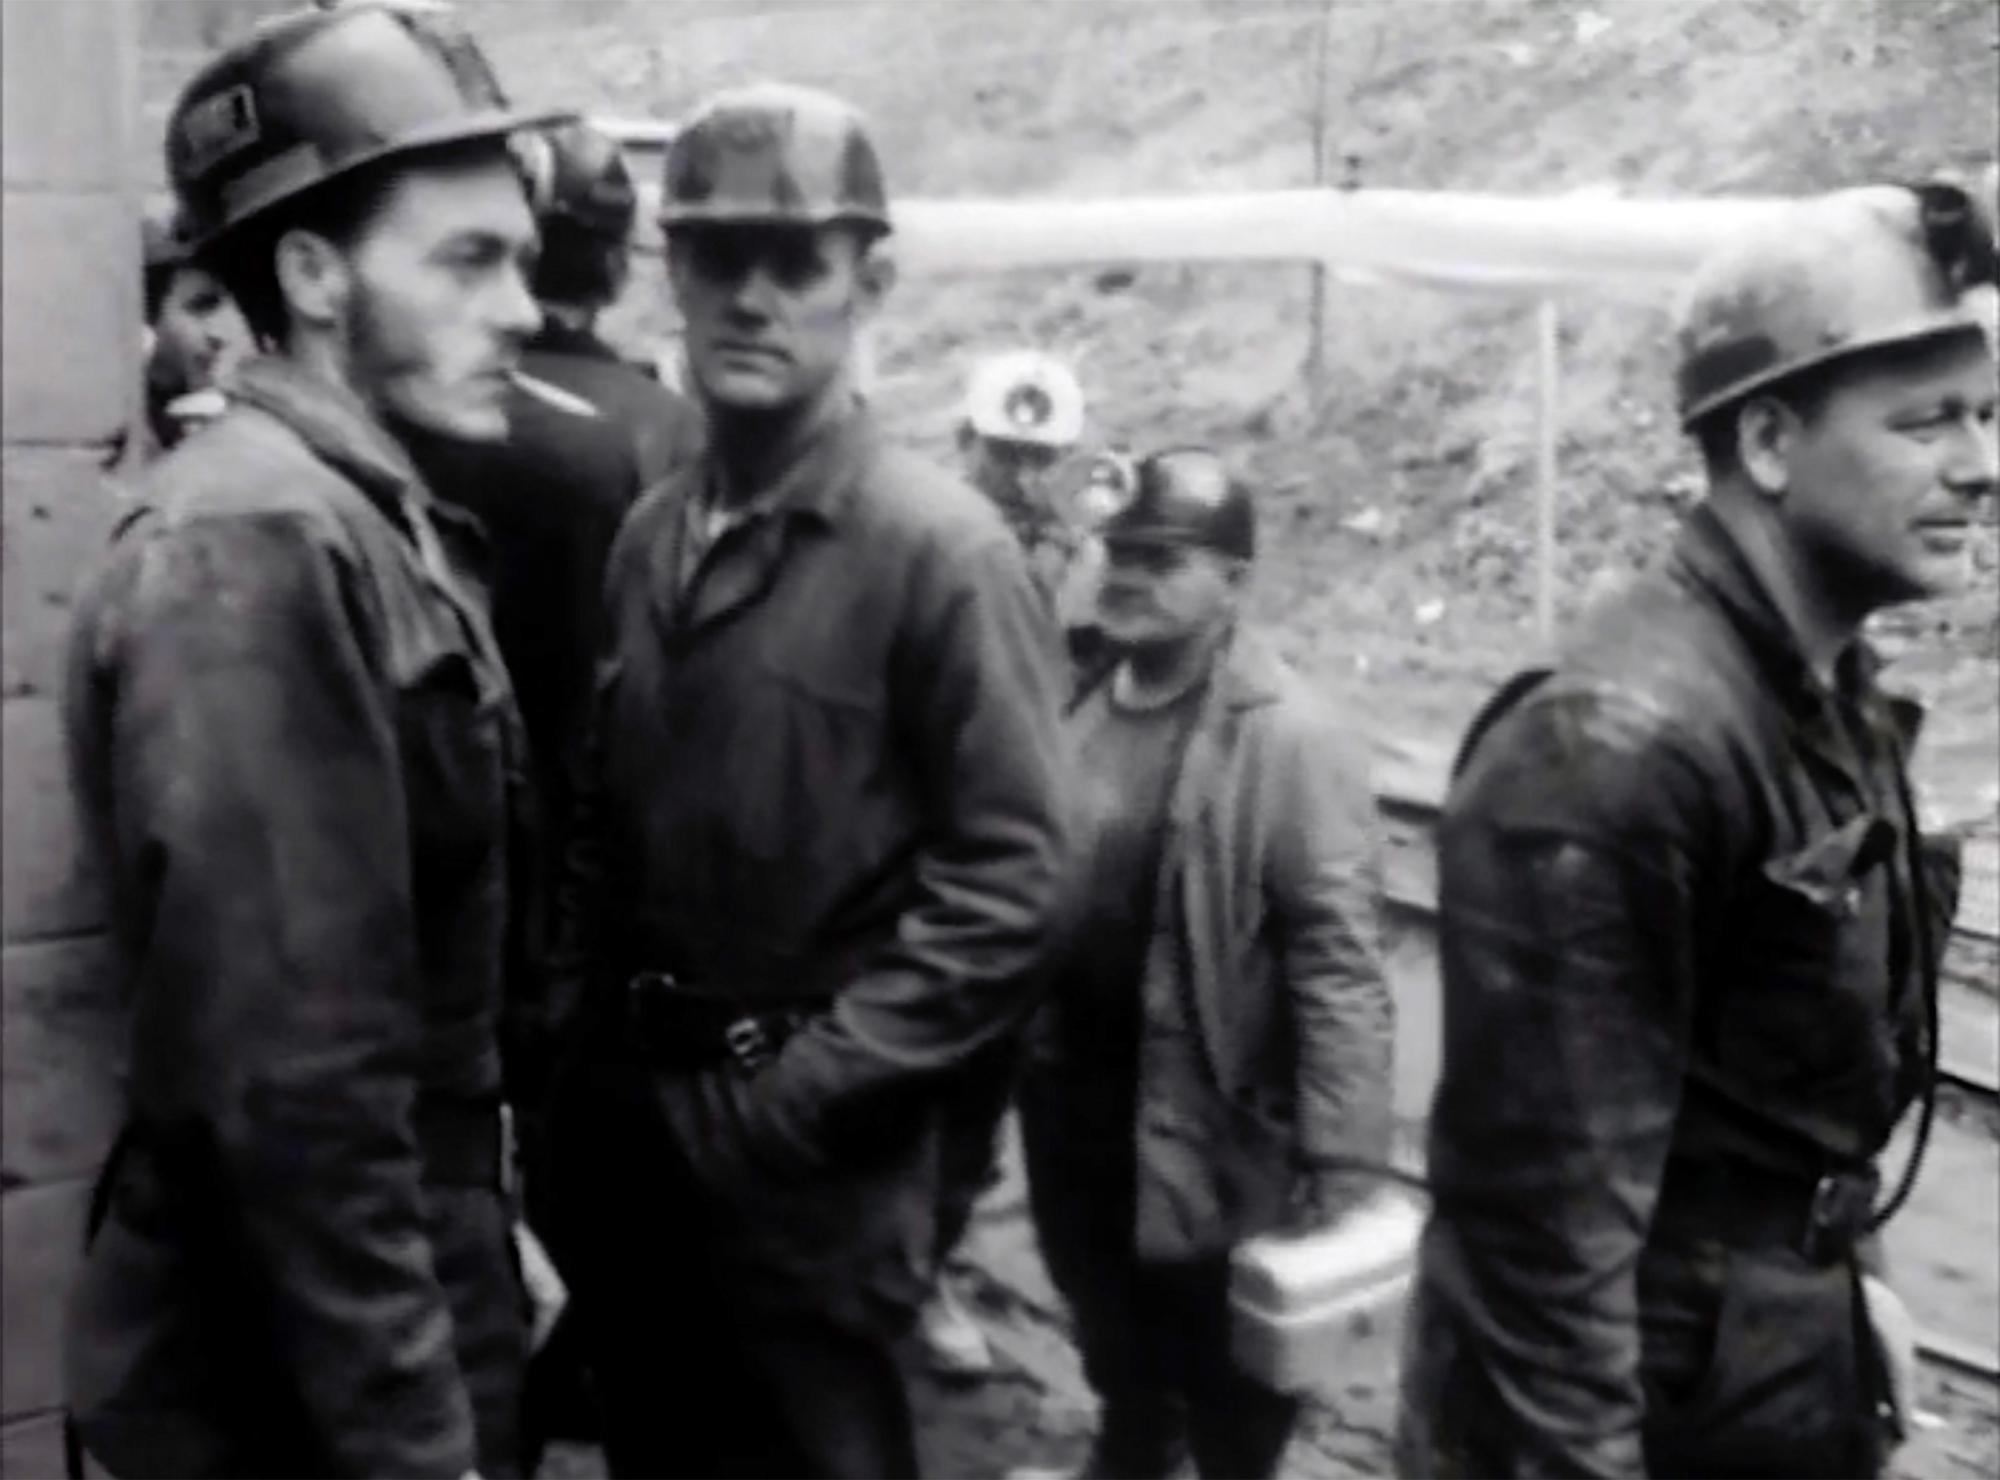 The United Mine Workers of America 1970: A House Divided